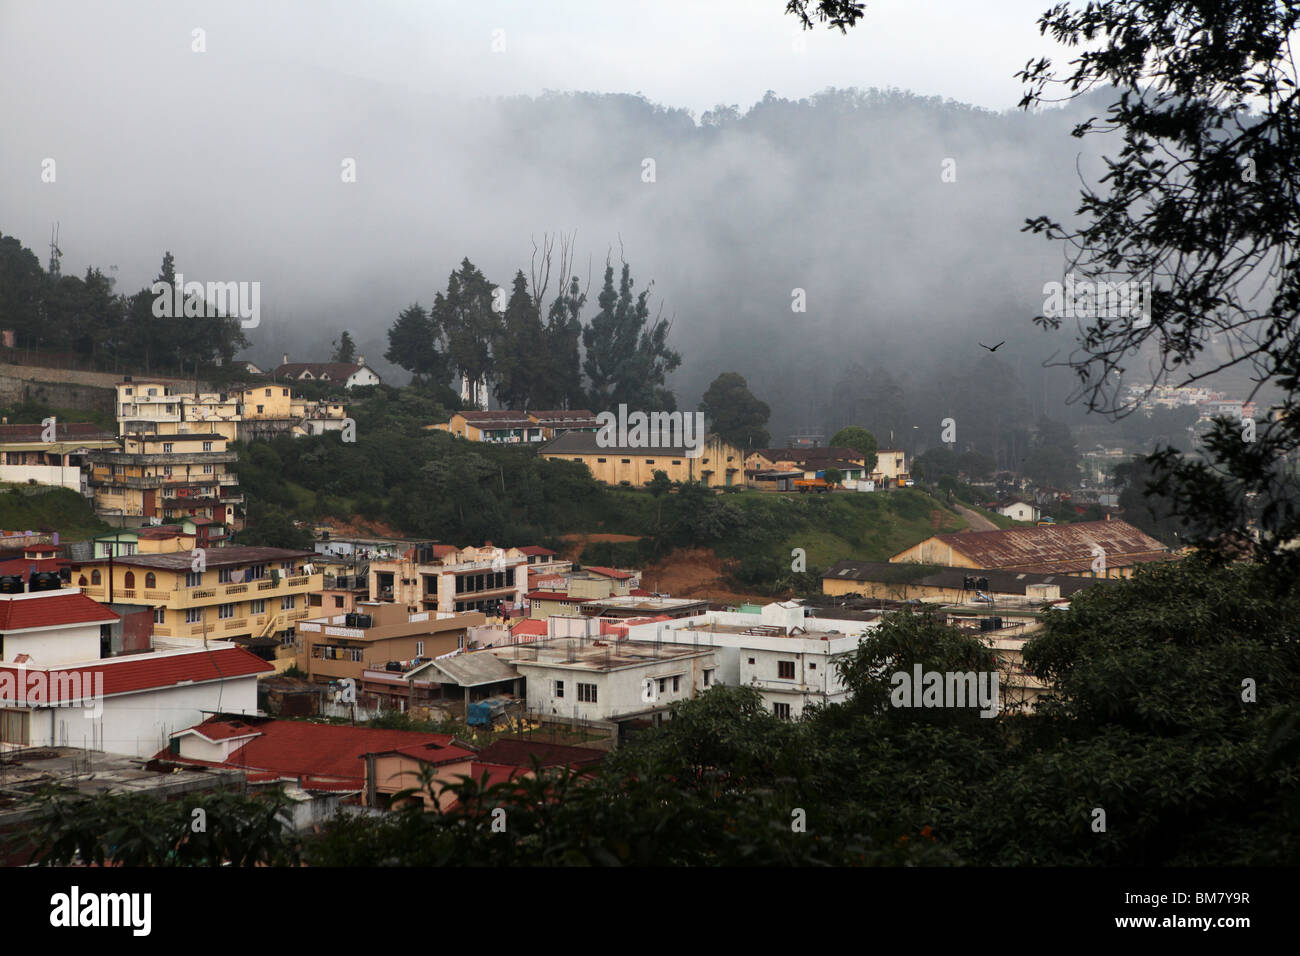 View of Ooty, short for Ootacamund, a popular hill station resort in Tamil Nadu state, India. Stock Photo